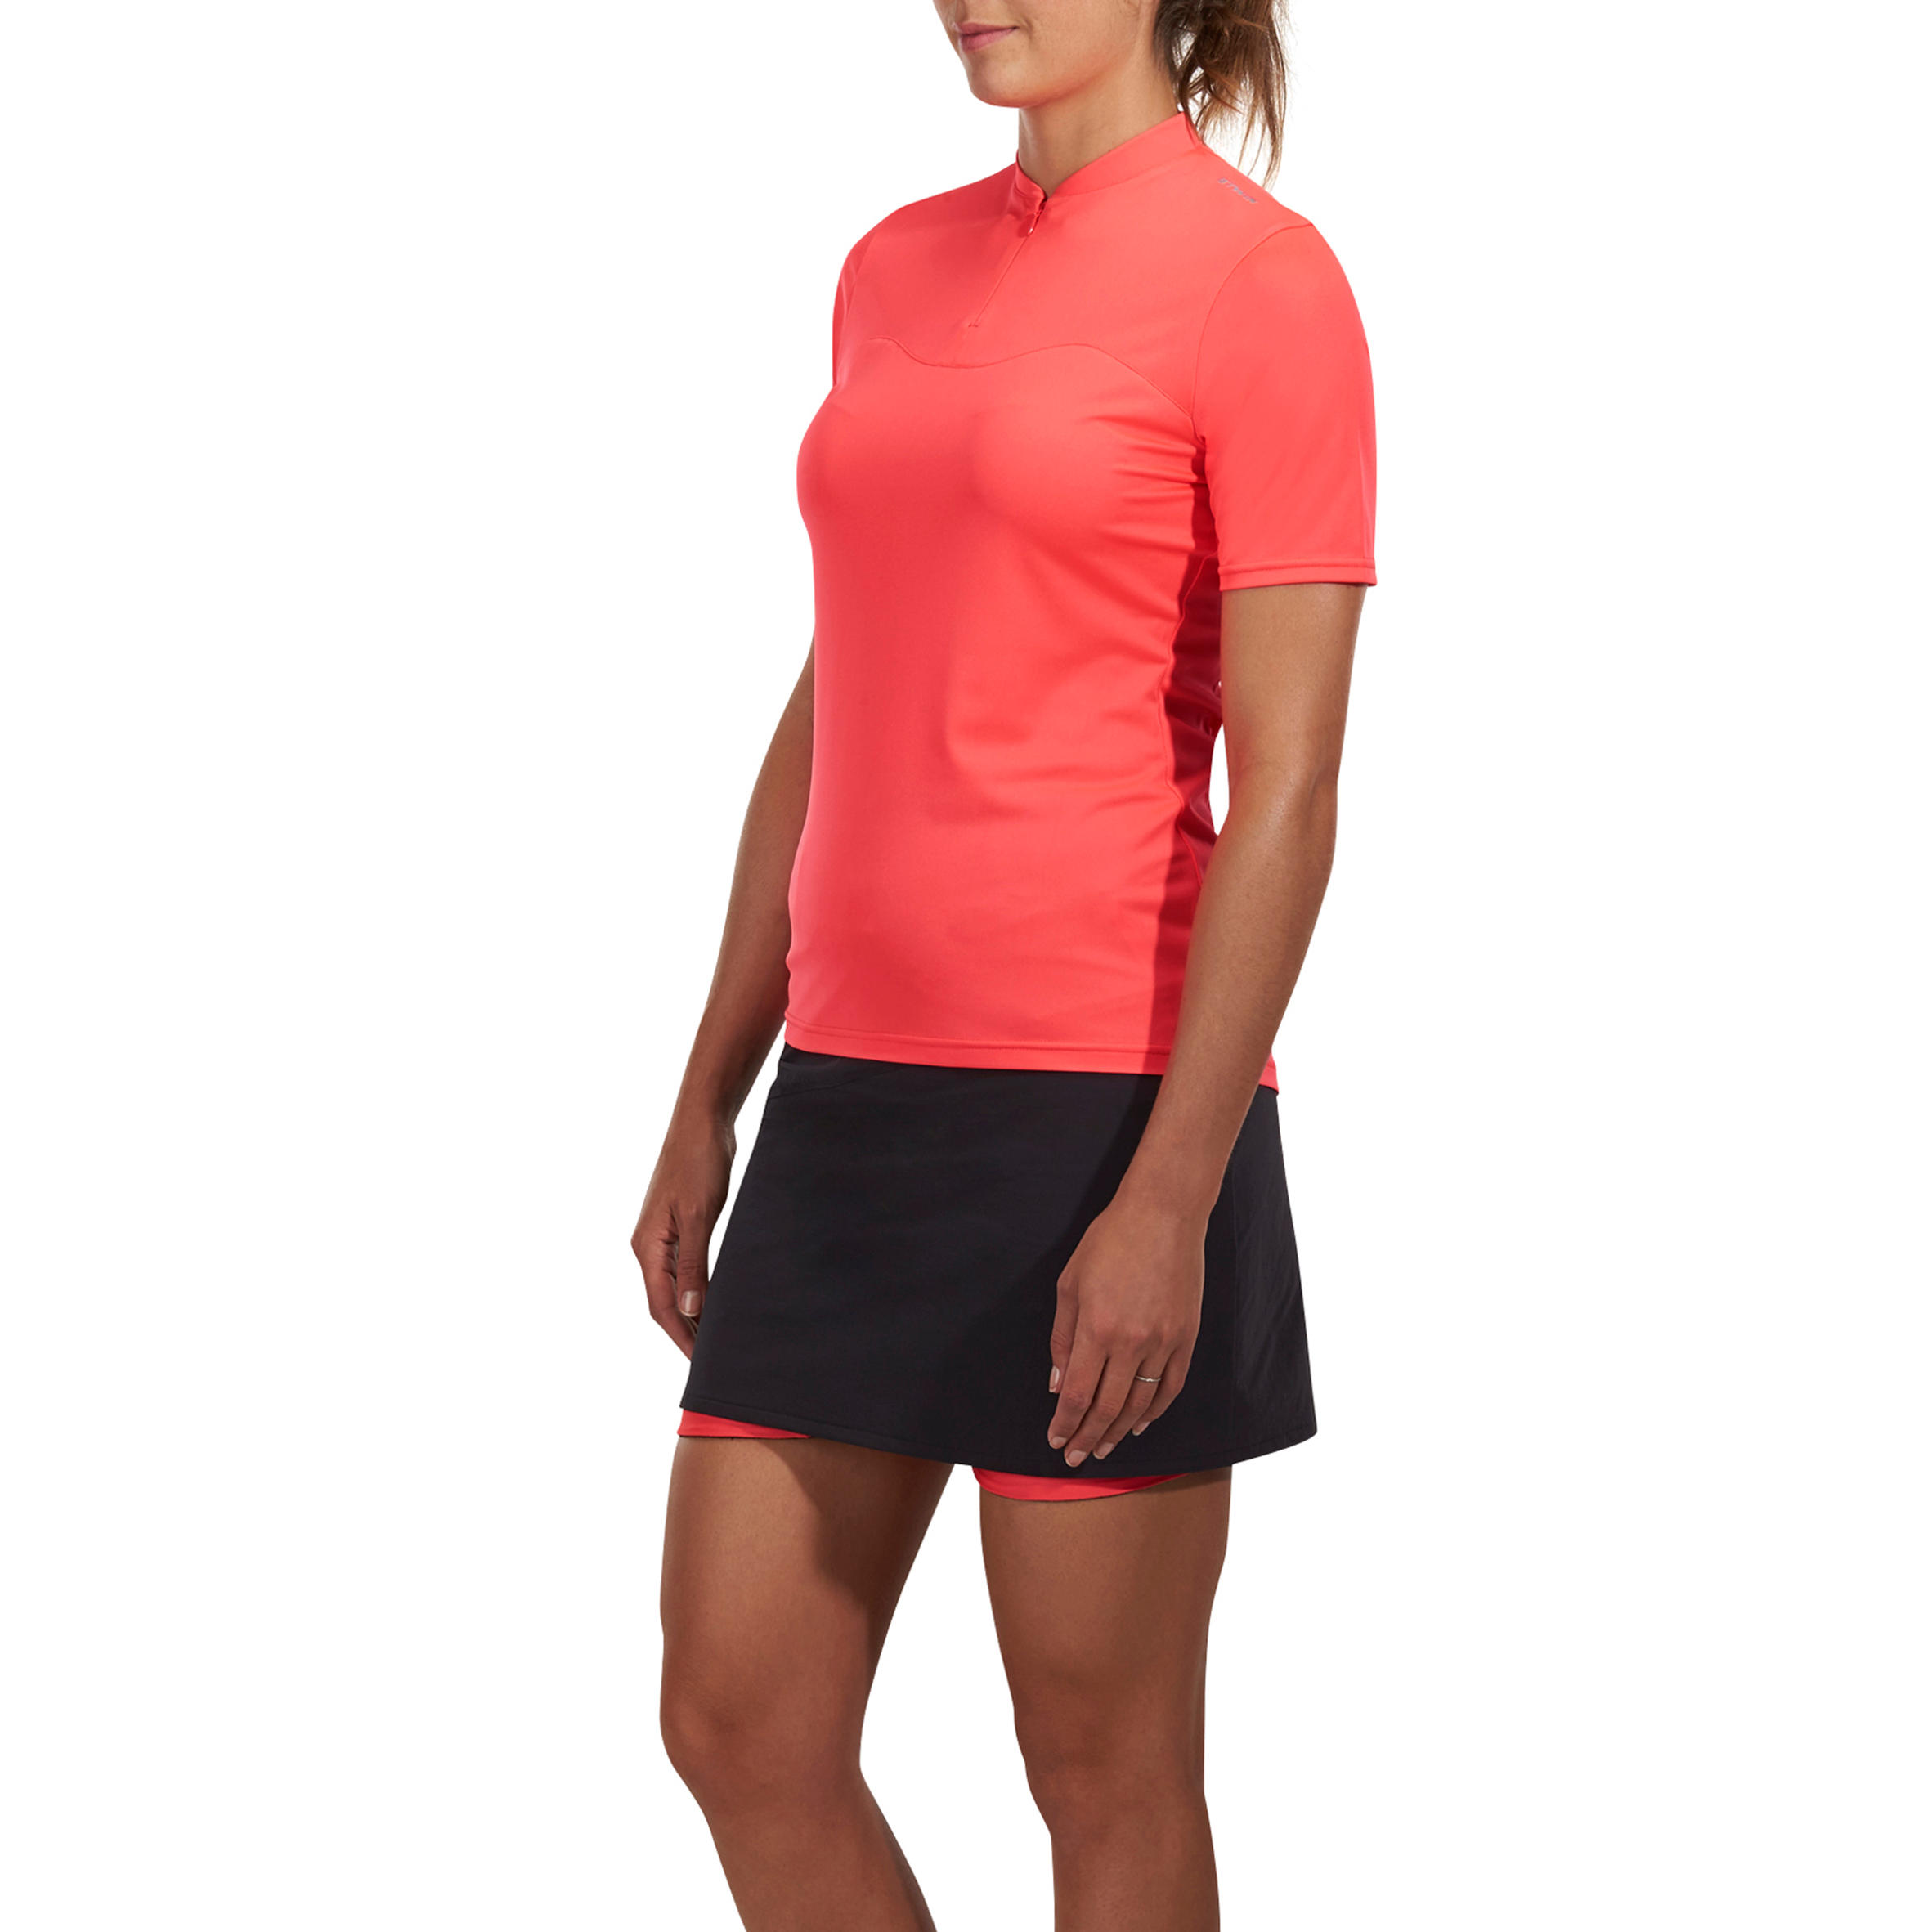 100 Women's Short-Sleeved Cycling Jersey - Pink 10/20